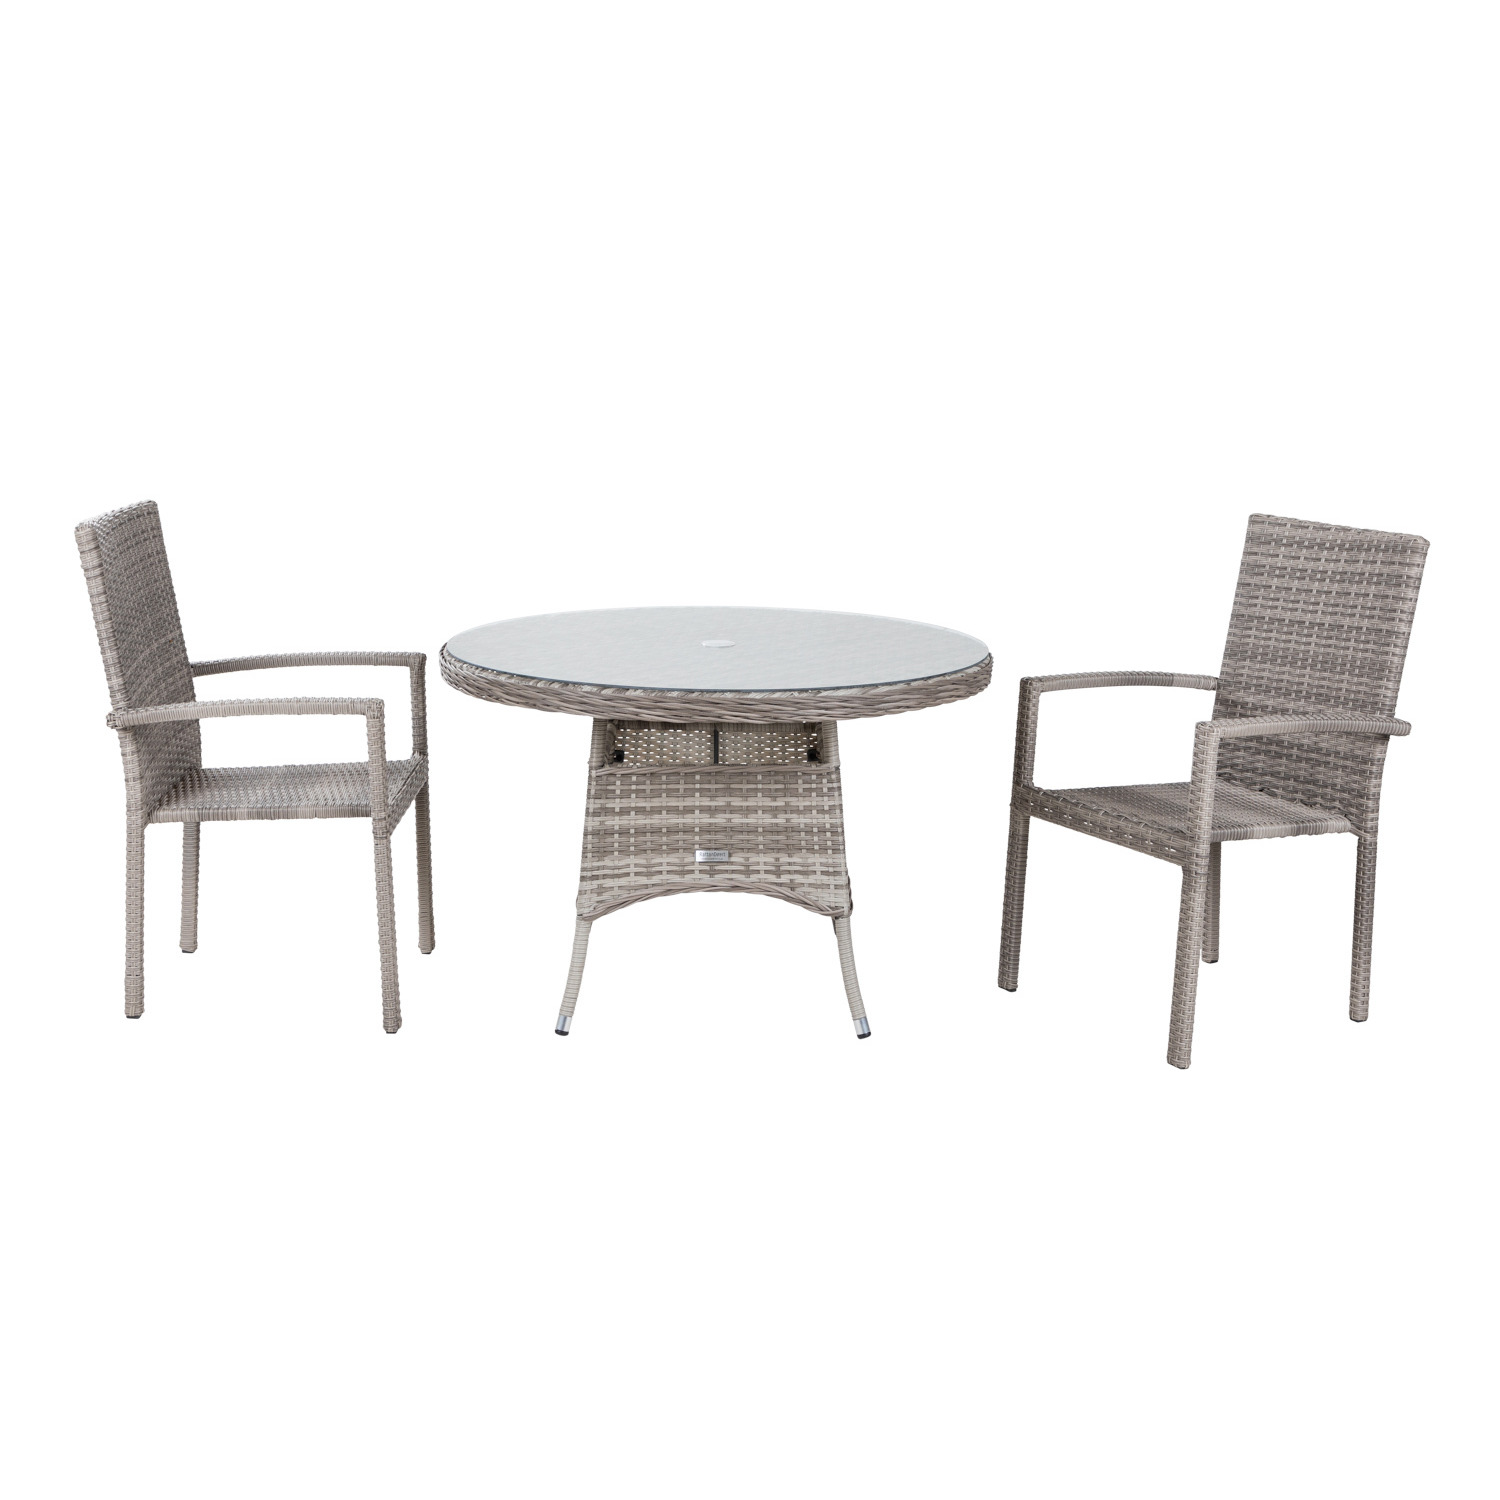 Small Round Rattan Garden Dining Table & 2 Stackable Chairs in Grey - Rio - Rattan Direct